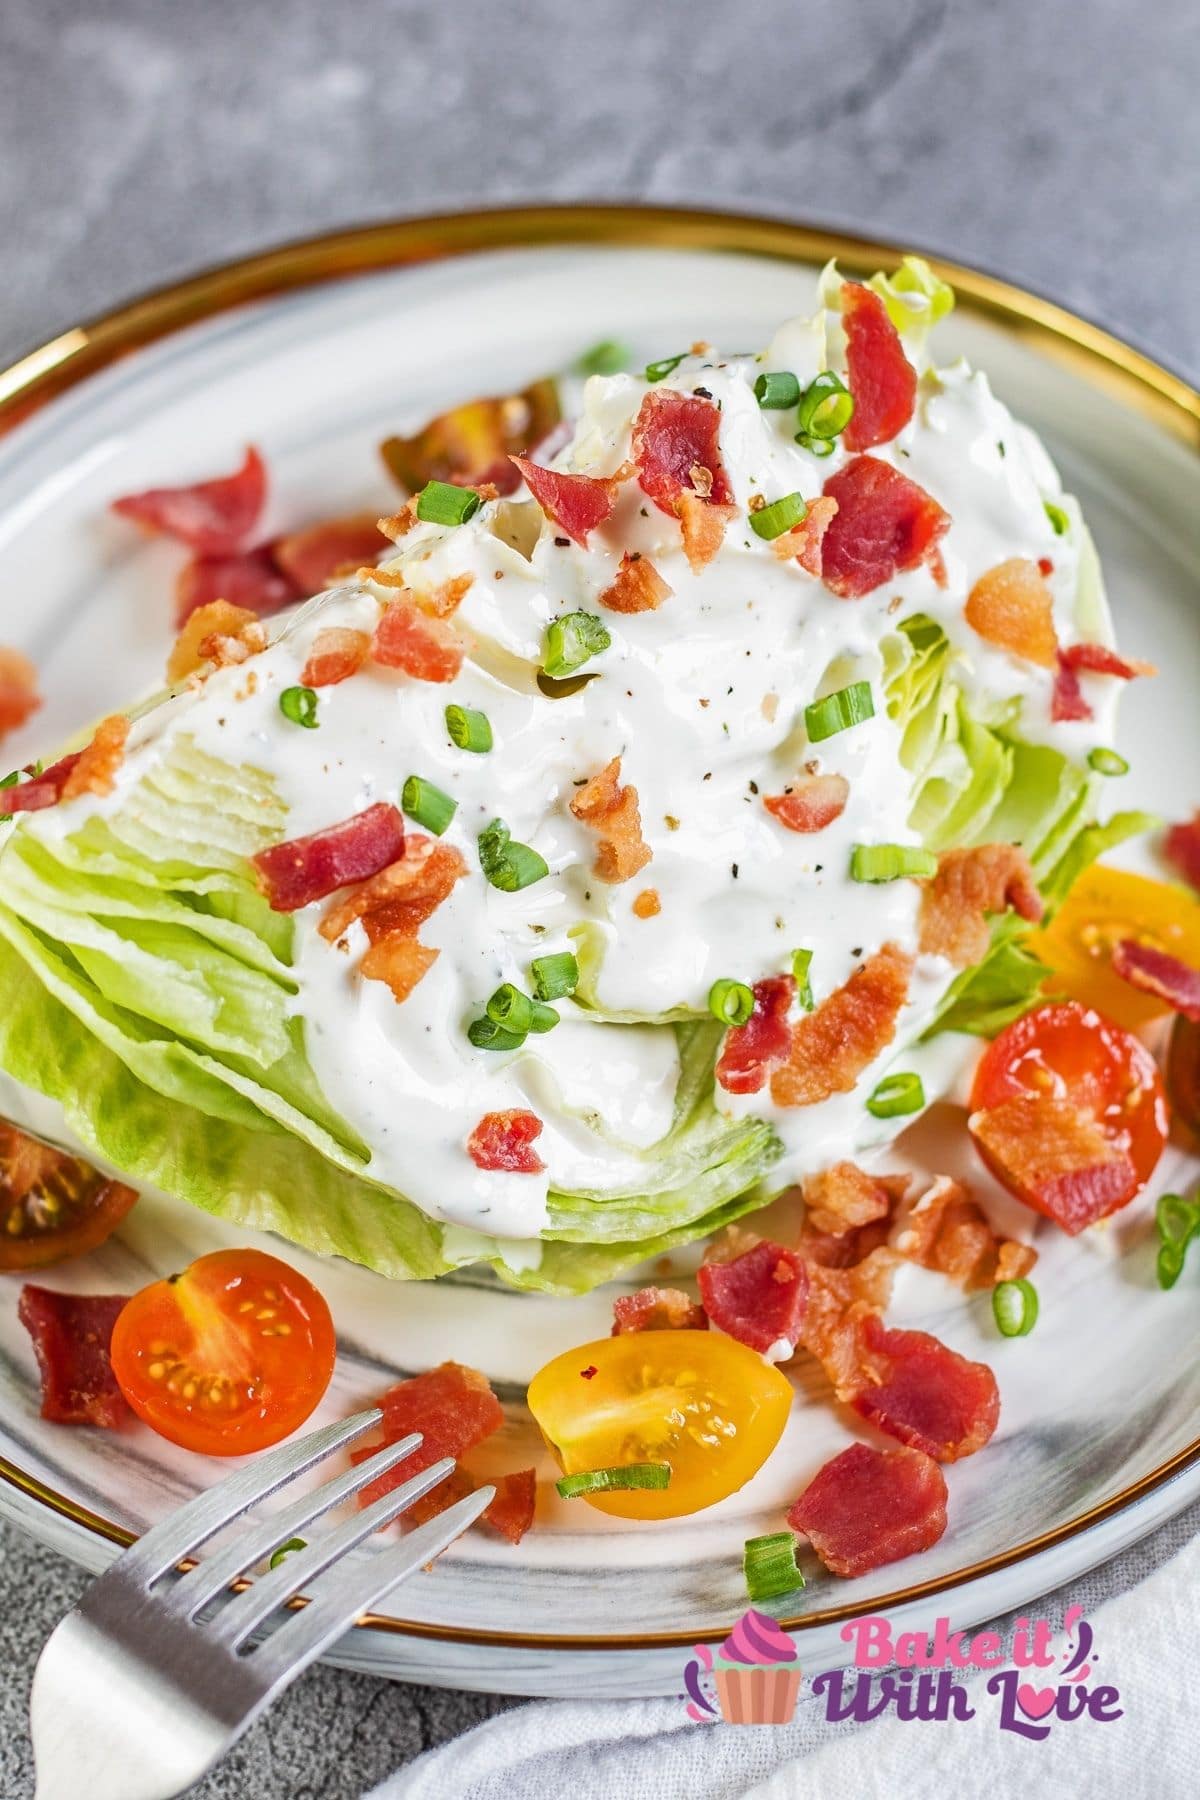 Iceberg wedge salad on marbled plate with classic toppings.